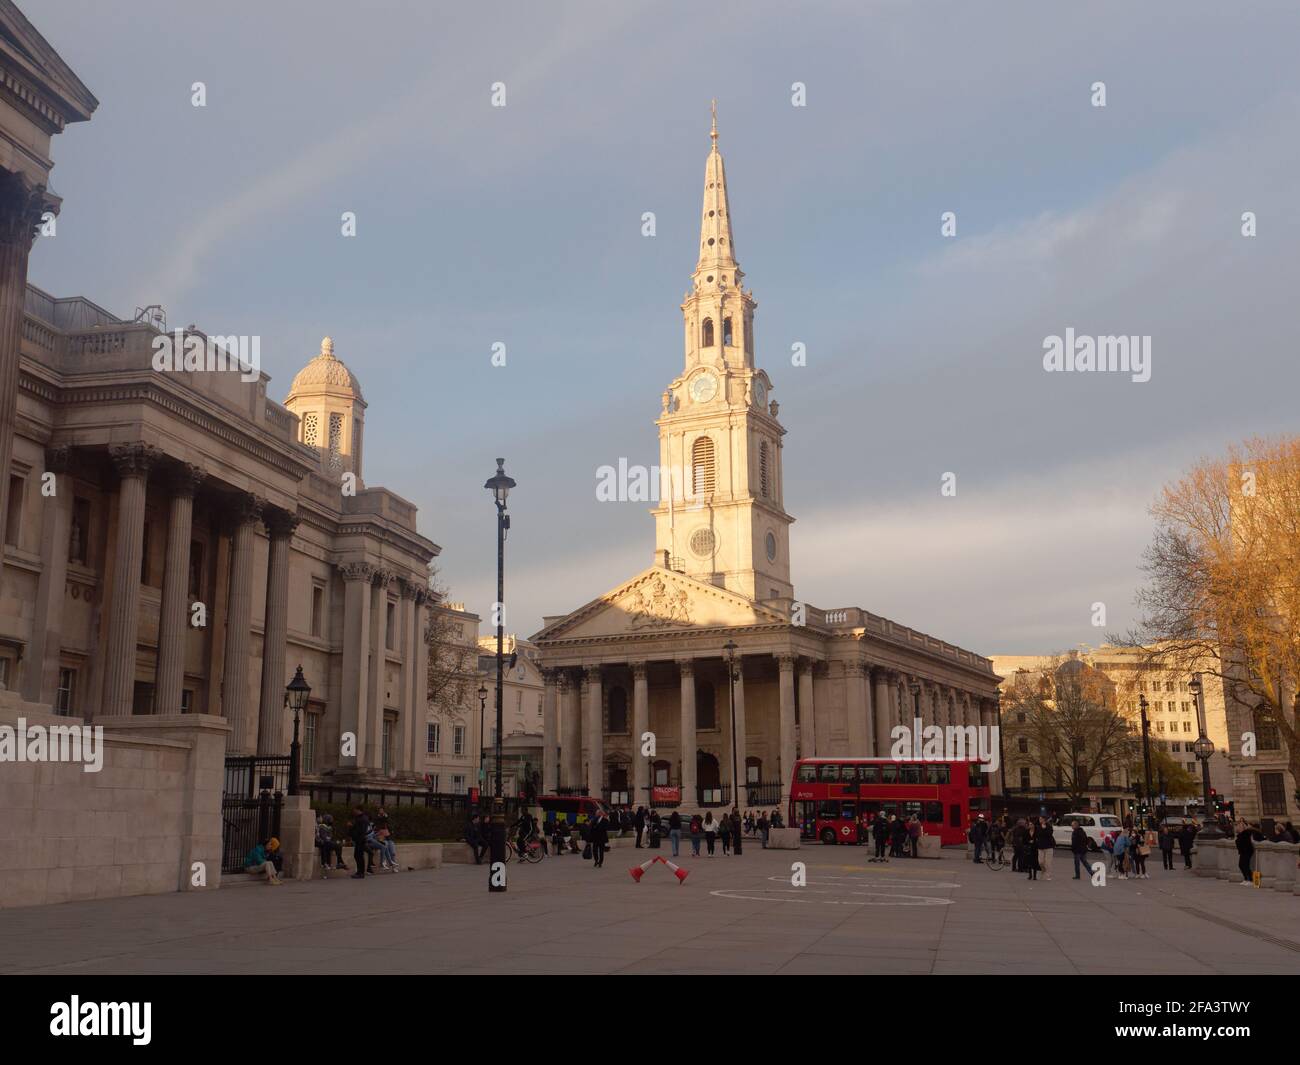 London, Greater London, England - 17 2021. April: Trafalgar Square mit St. Martin in der Fields Church Middle und National Gallery links. Stockfoto